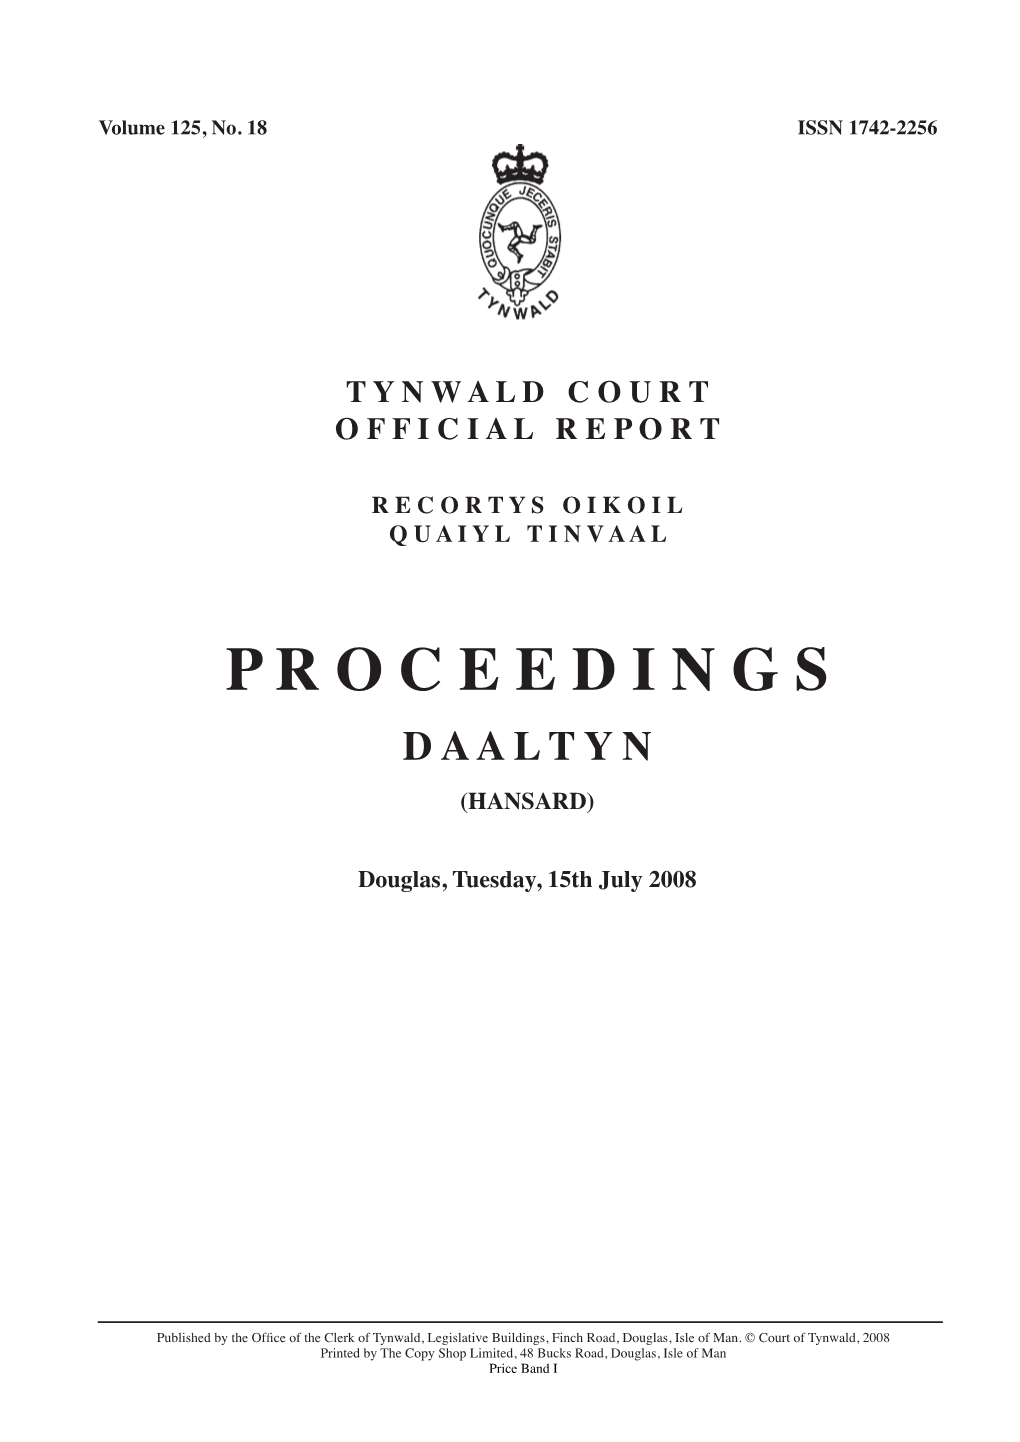 125/18 TYNWALD Pages 15.7.08